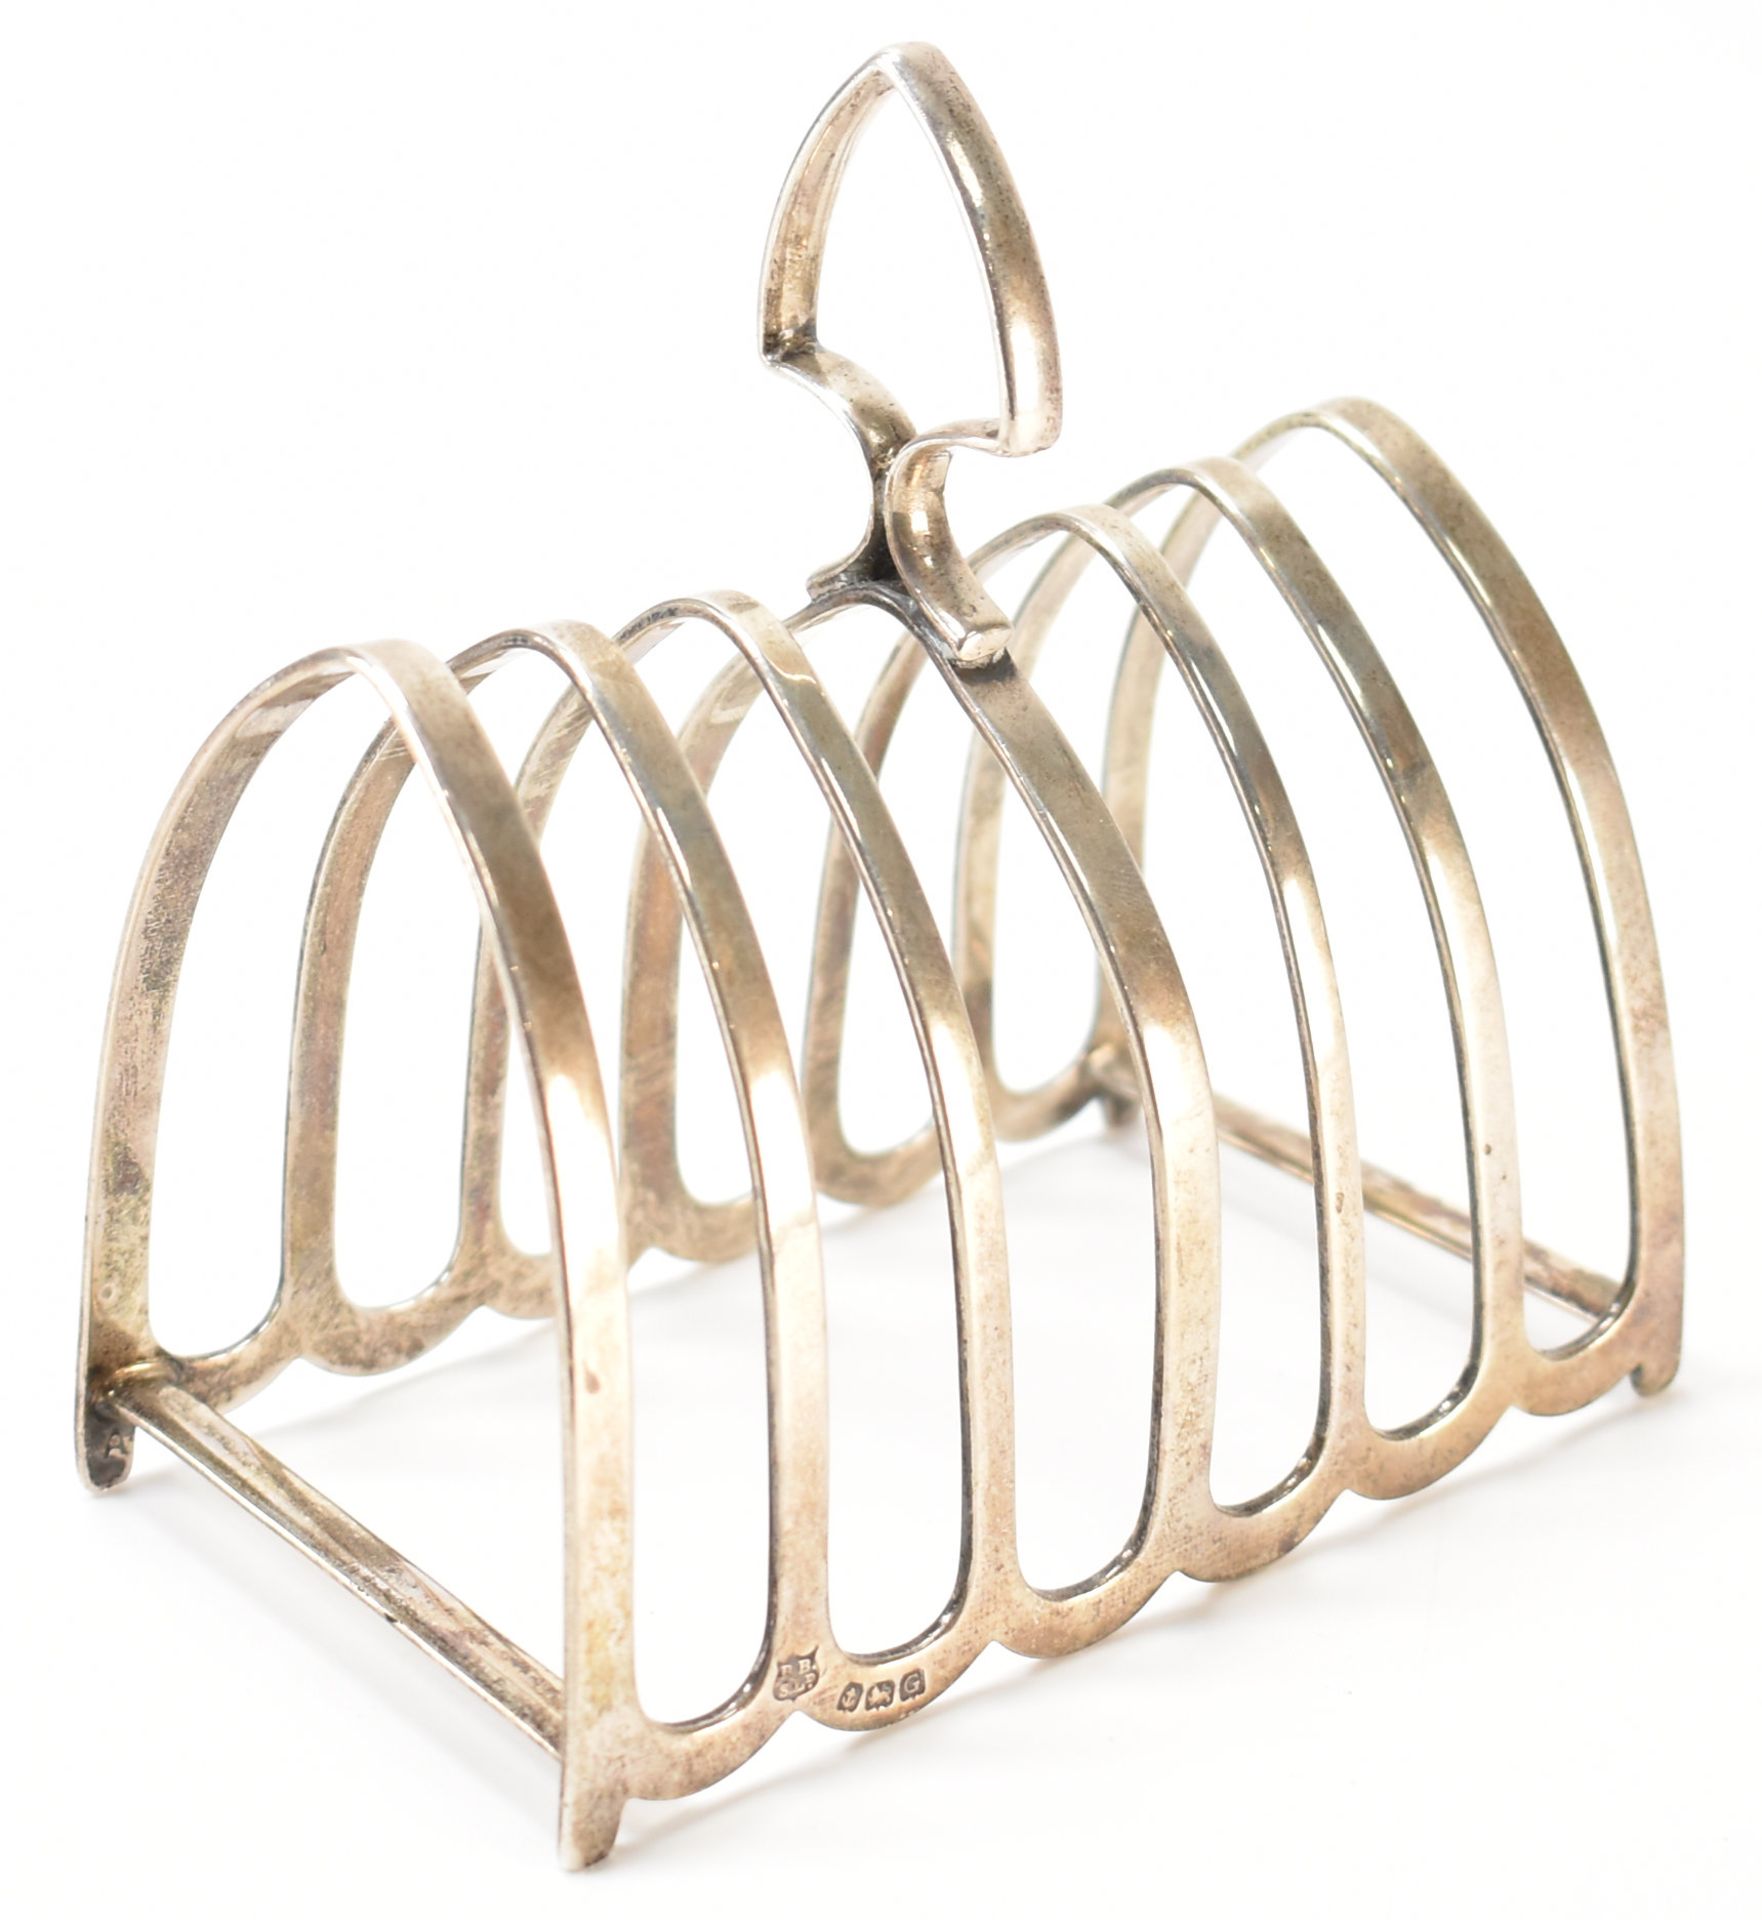 1930S BARKER BROTHERS SILVER HALLMARKED TOAST RACK - Image 3 of 4